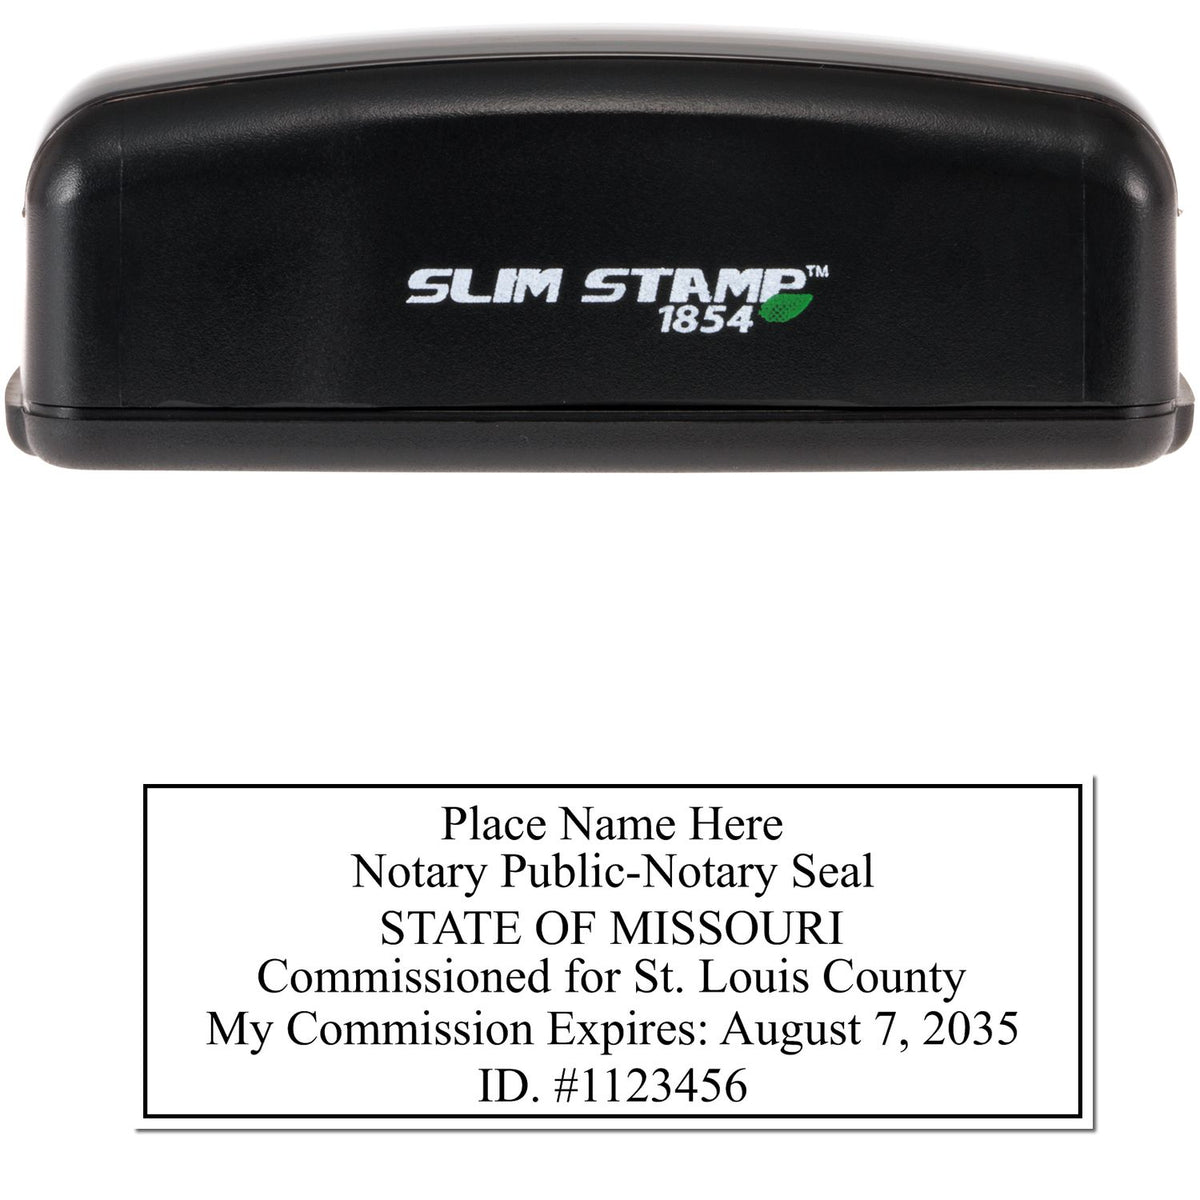 The main image for the Slim Pre-Inked Rectangular Notary Stamp for Missouri depicting a sample of the imprint and electronic files